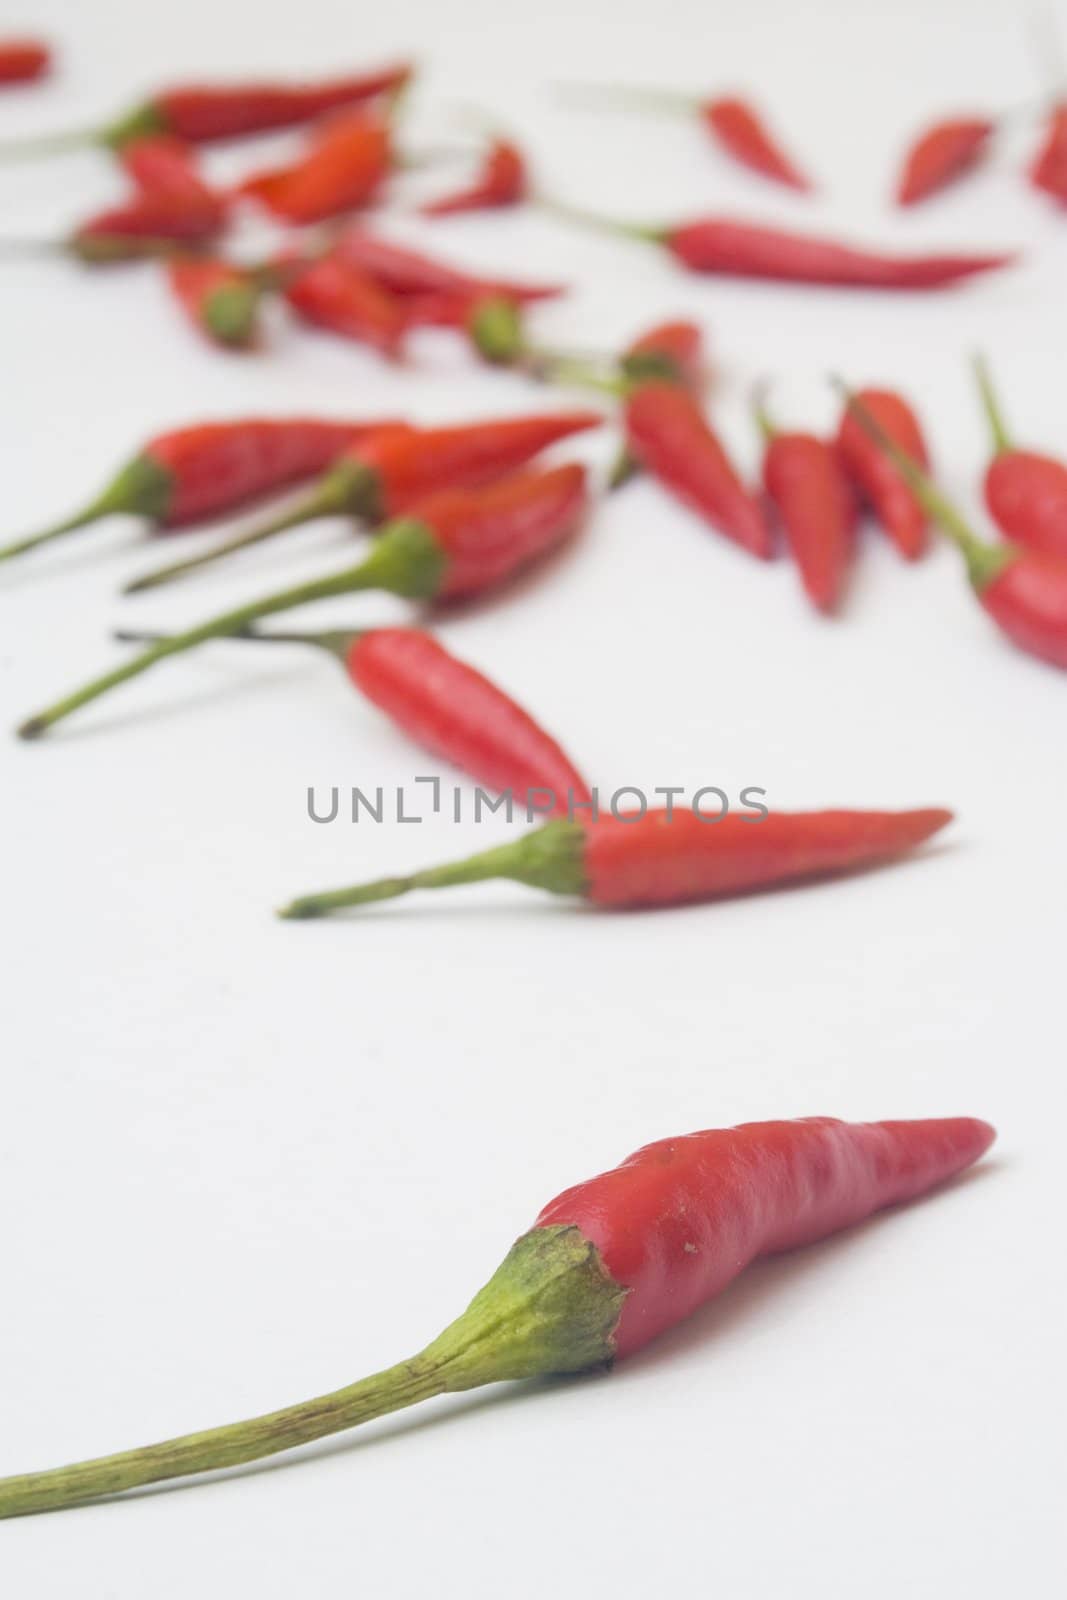 Chili peppers by timscottrom